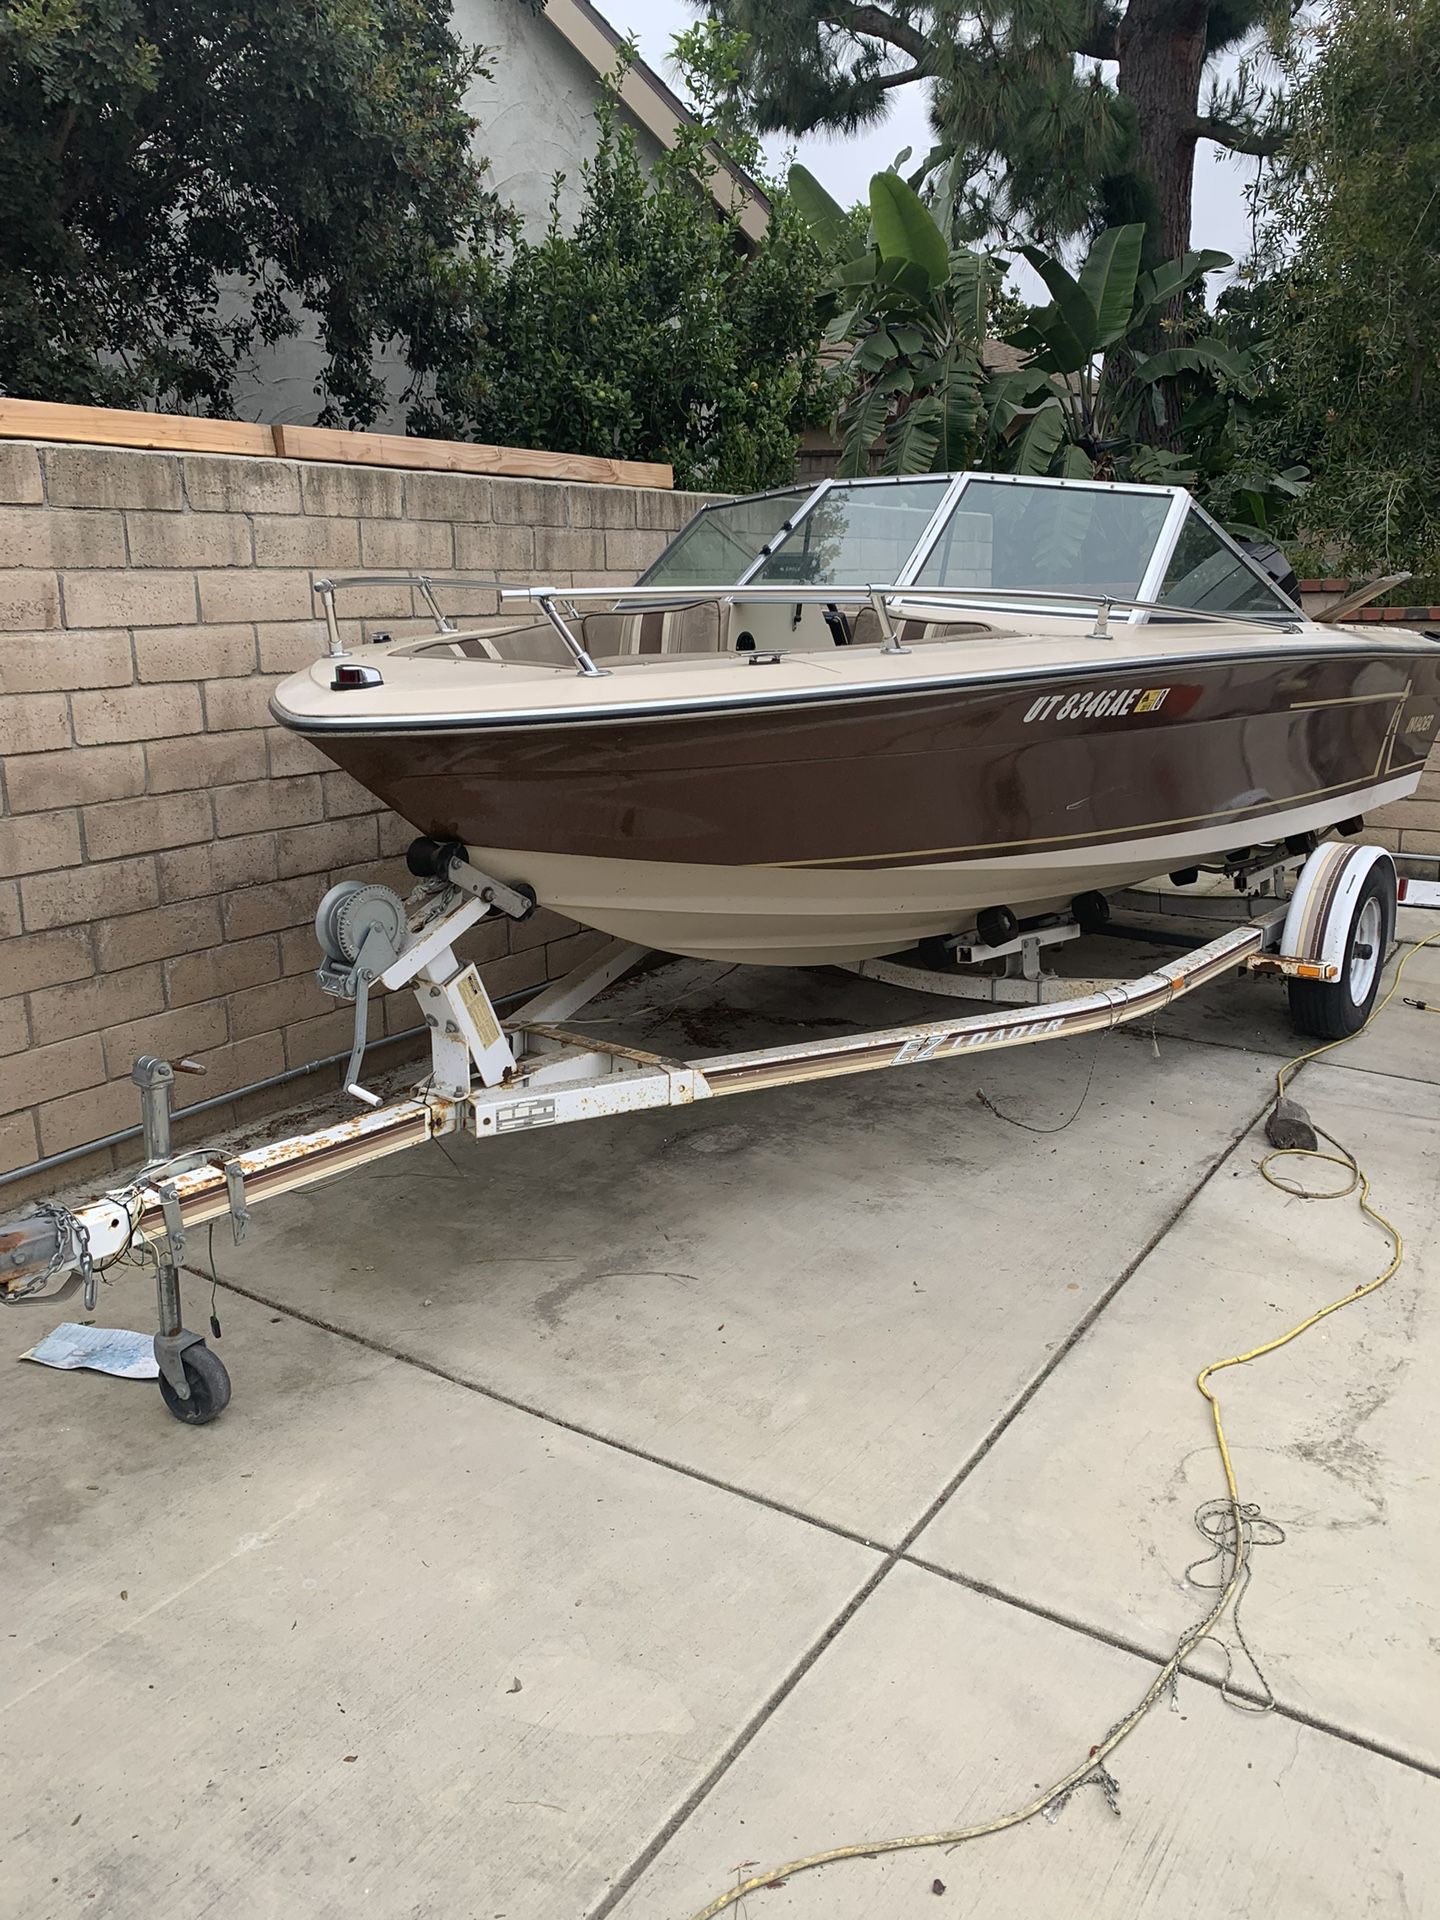 17 Foot Invader (for Parts) With 150 Mercury Outboard